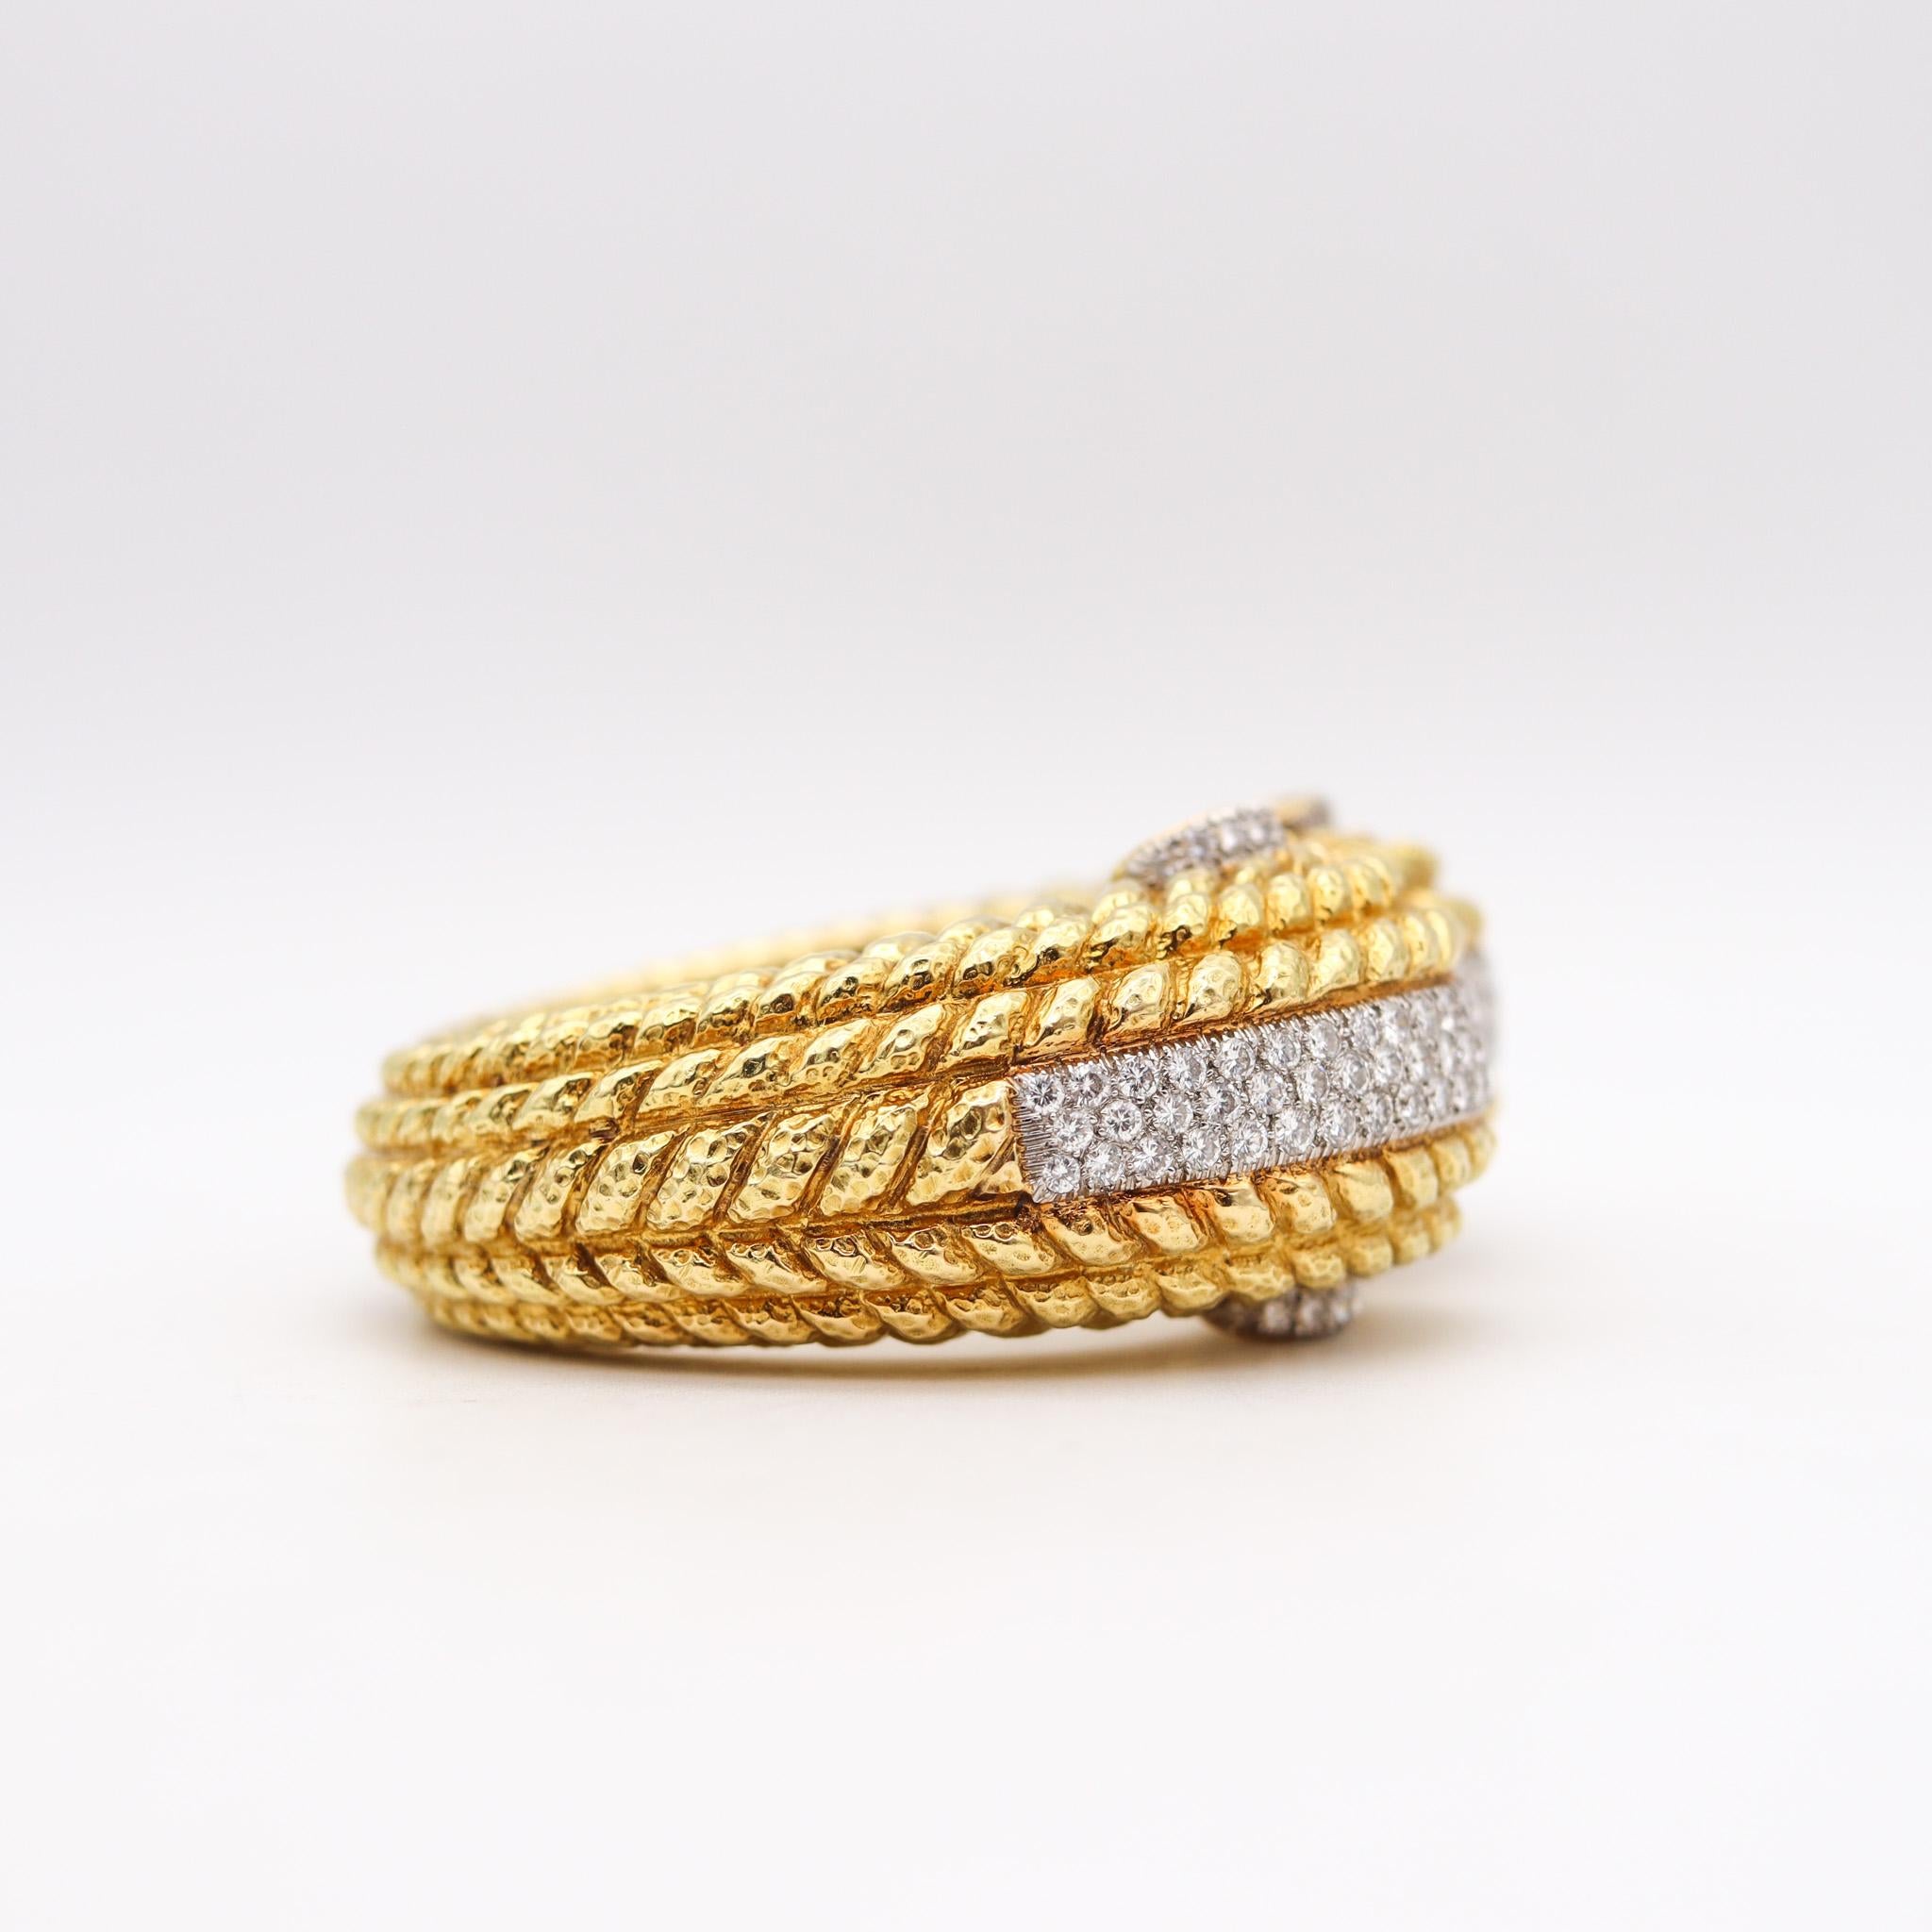 David Webb 1960 Bangle Bracelet in 18kt Yellow Gold with 9.52 Ctw in Diamonds For Sale 3